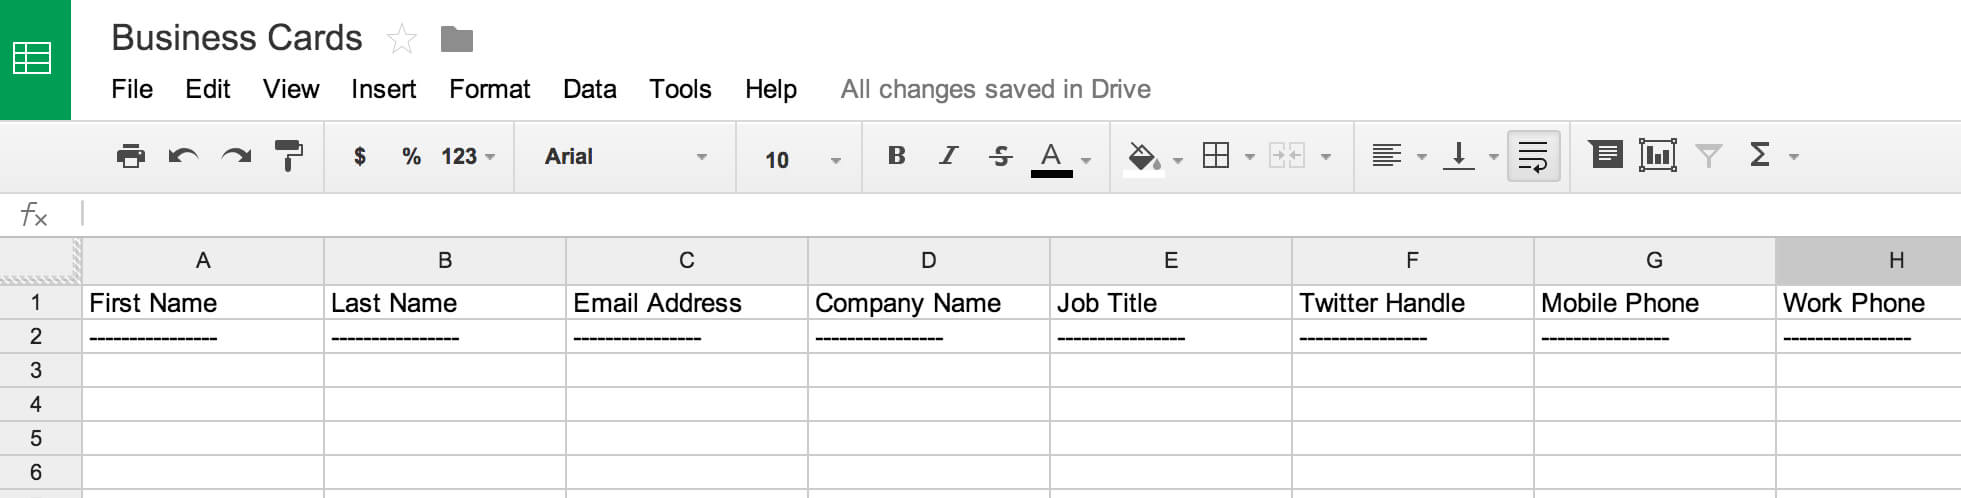 Template Google Docs Spreadsheet | Sample Resume Entry Within Business Card Template For Google Docs